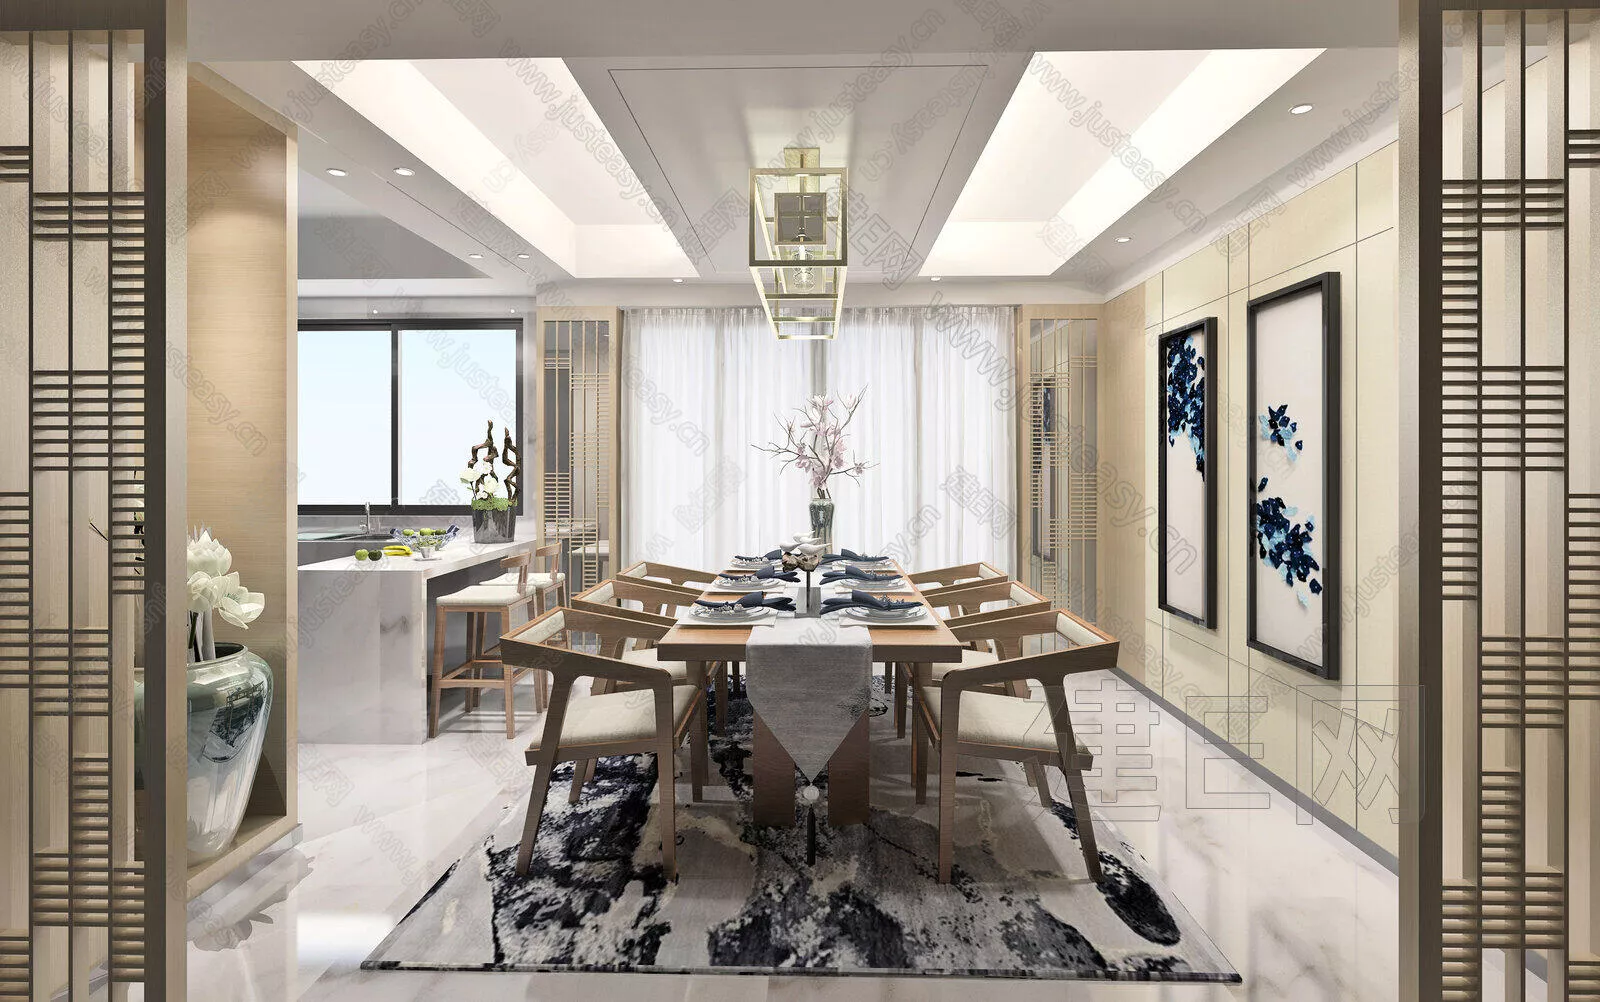 CHINESE DINING ROOM - SKETCHUP 3D SCENE - ENSCAPE - 112938388